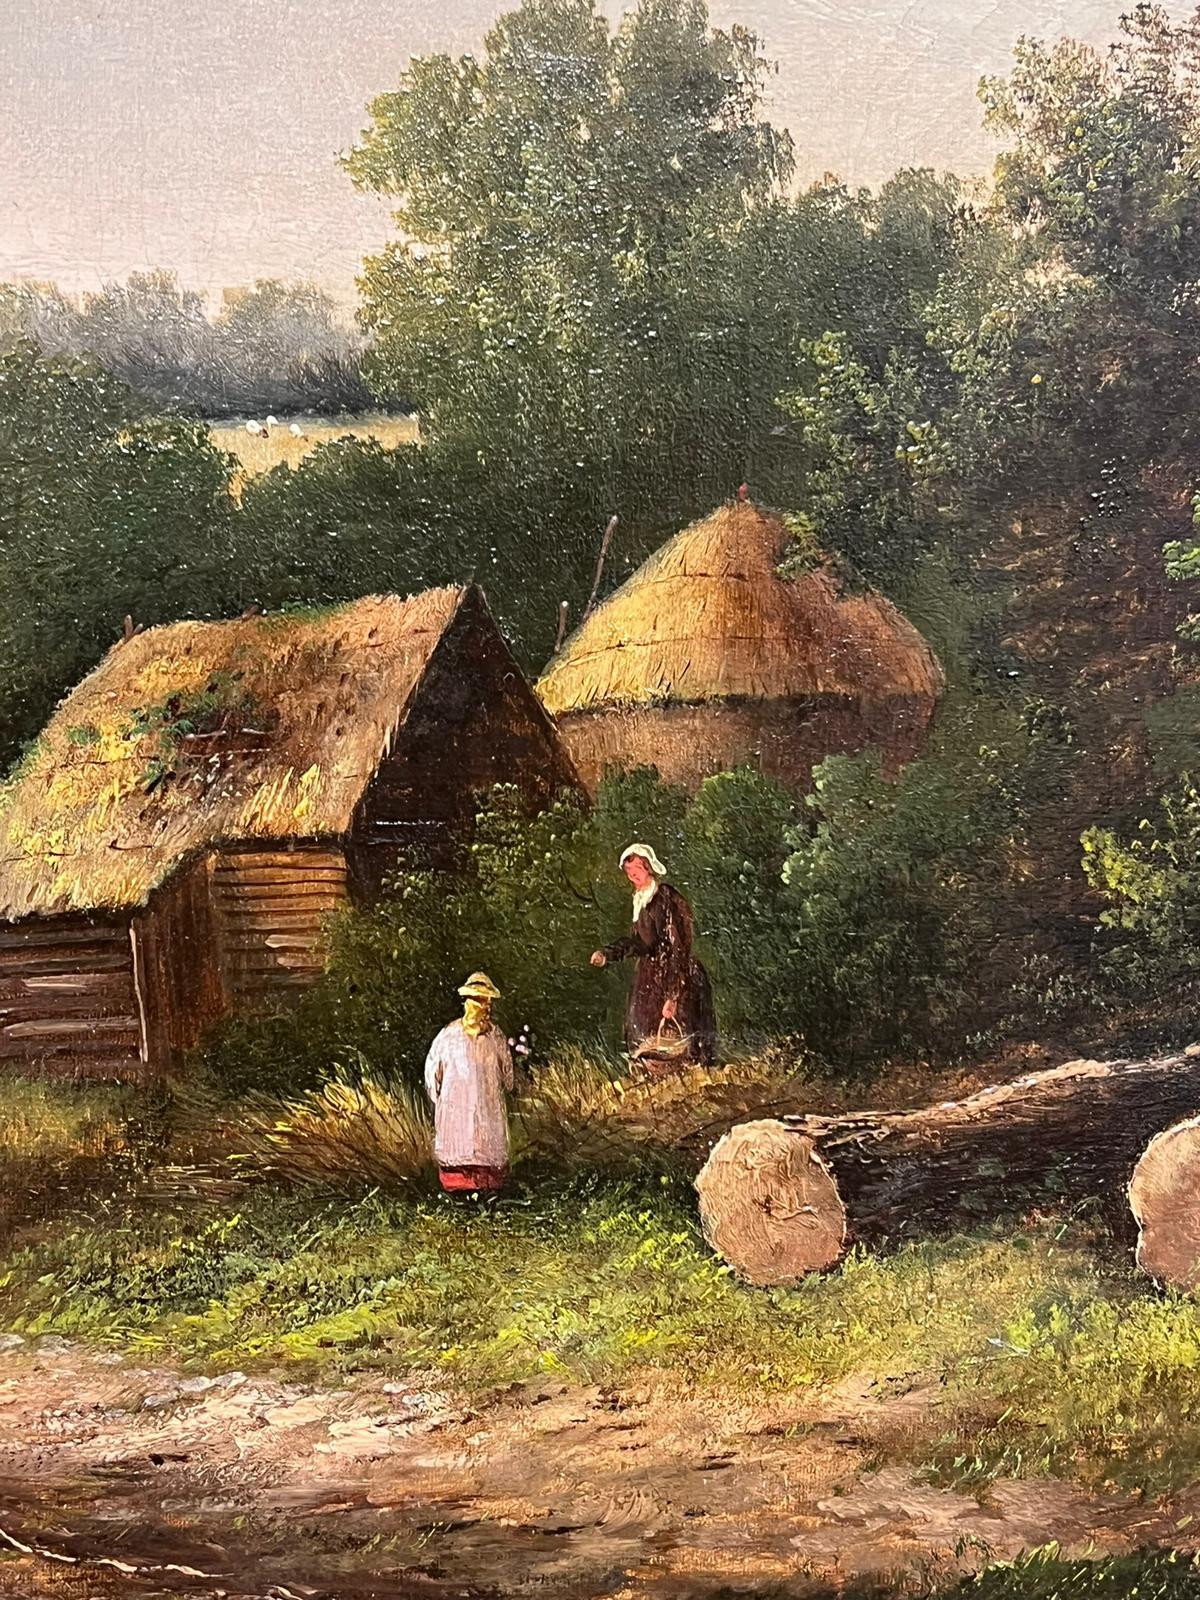 Pausing for Conversation
by William Yates (British, second half 19th century)
signed oil on canvas, unframed
canvas: 18 x 32 inches
provenance: private collection, England
condition: very good and sound condition